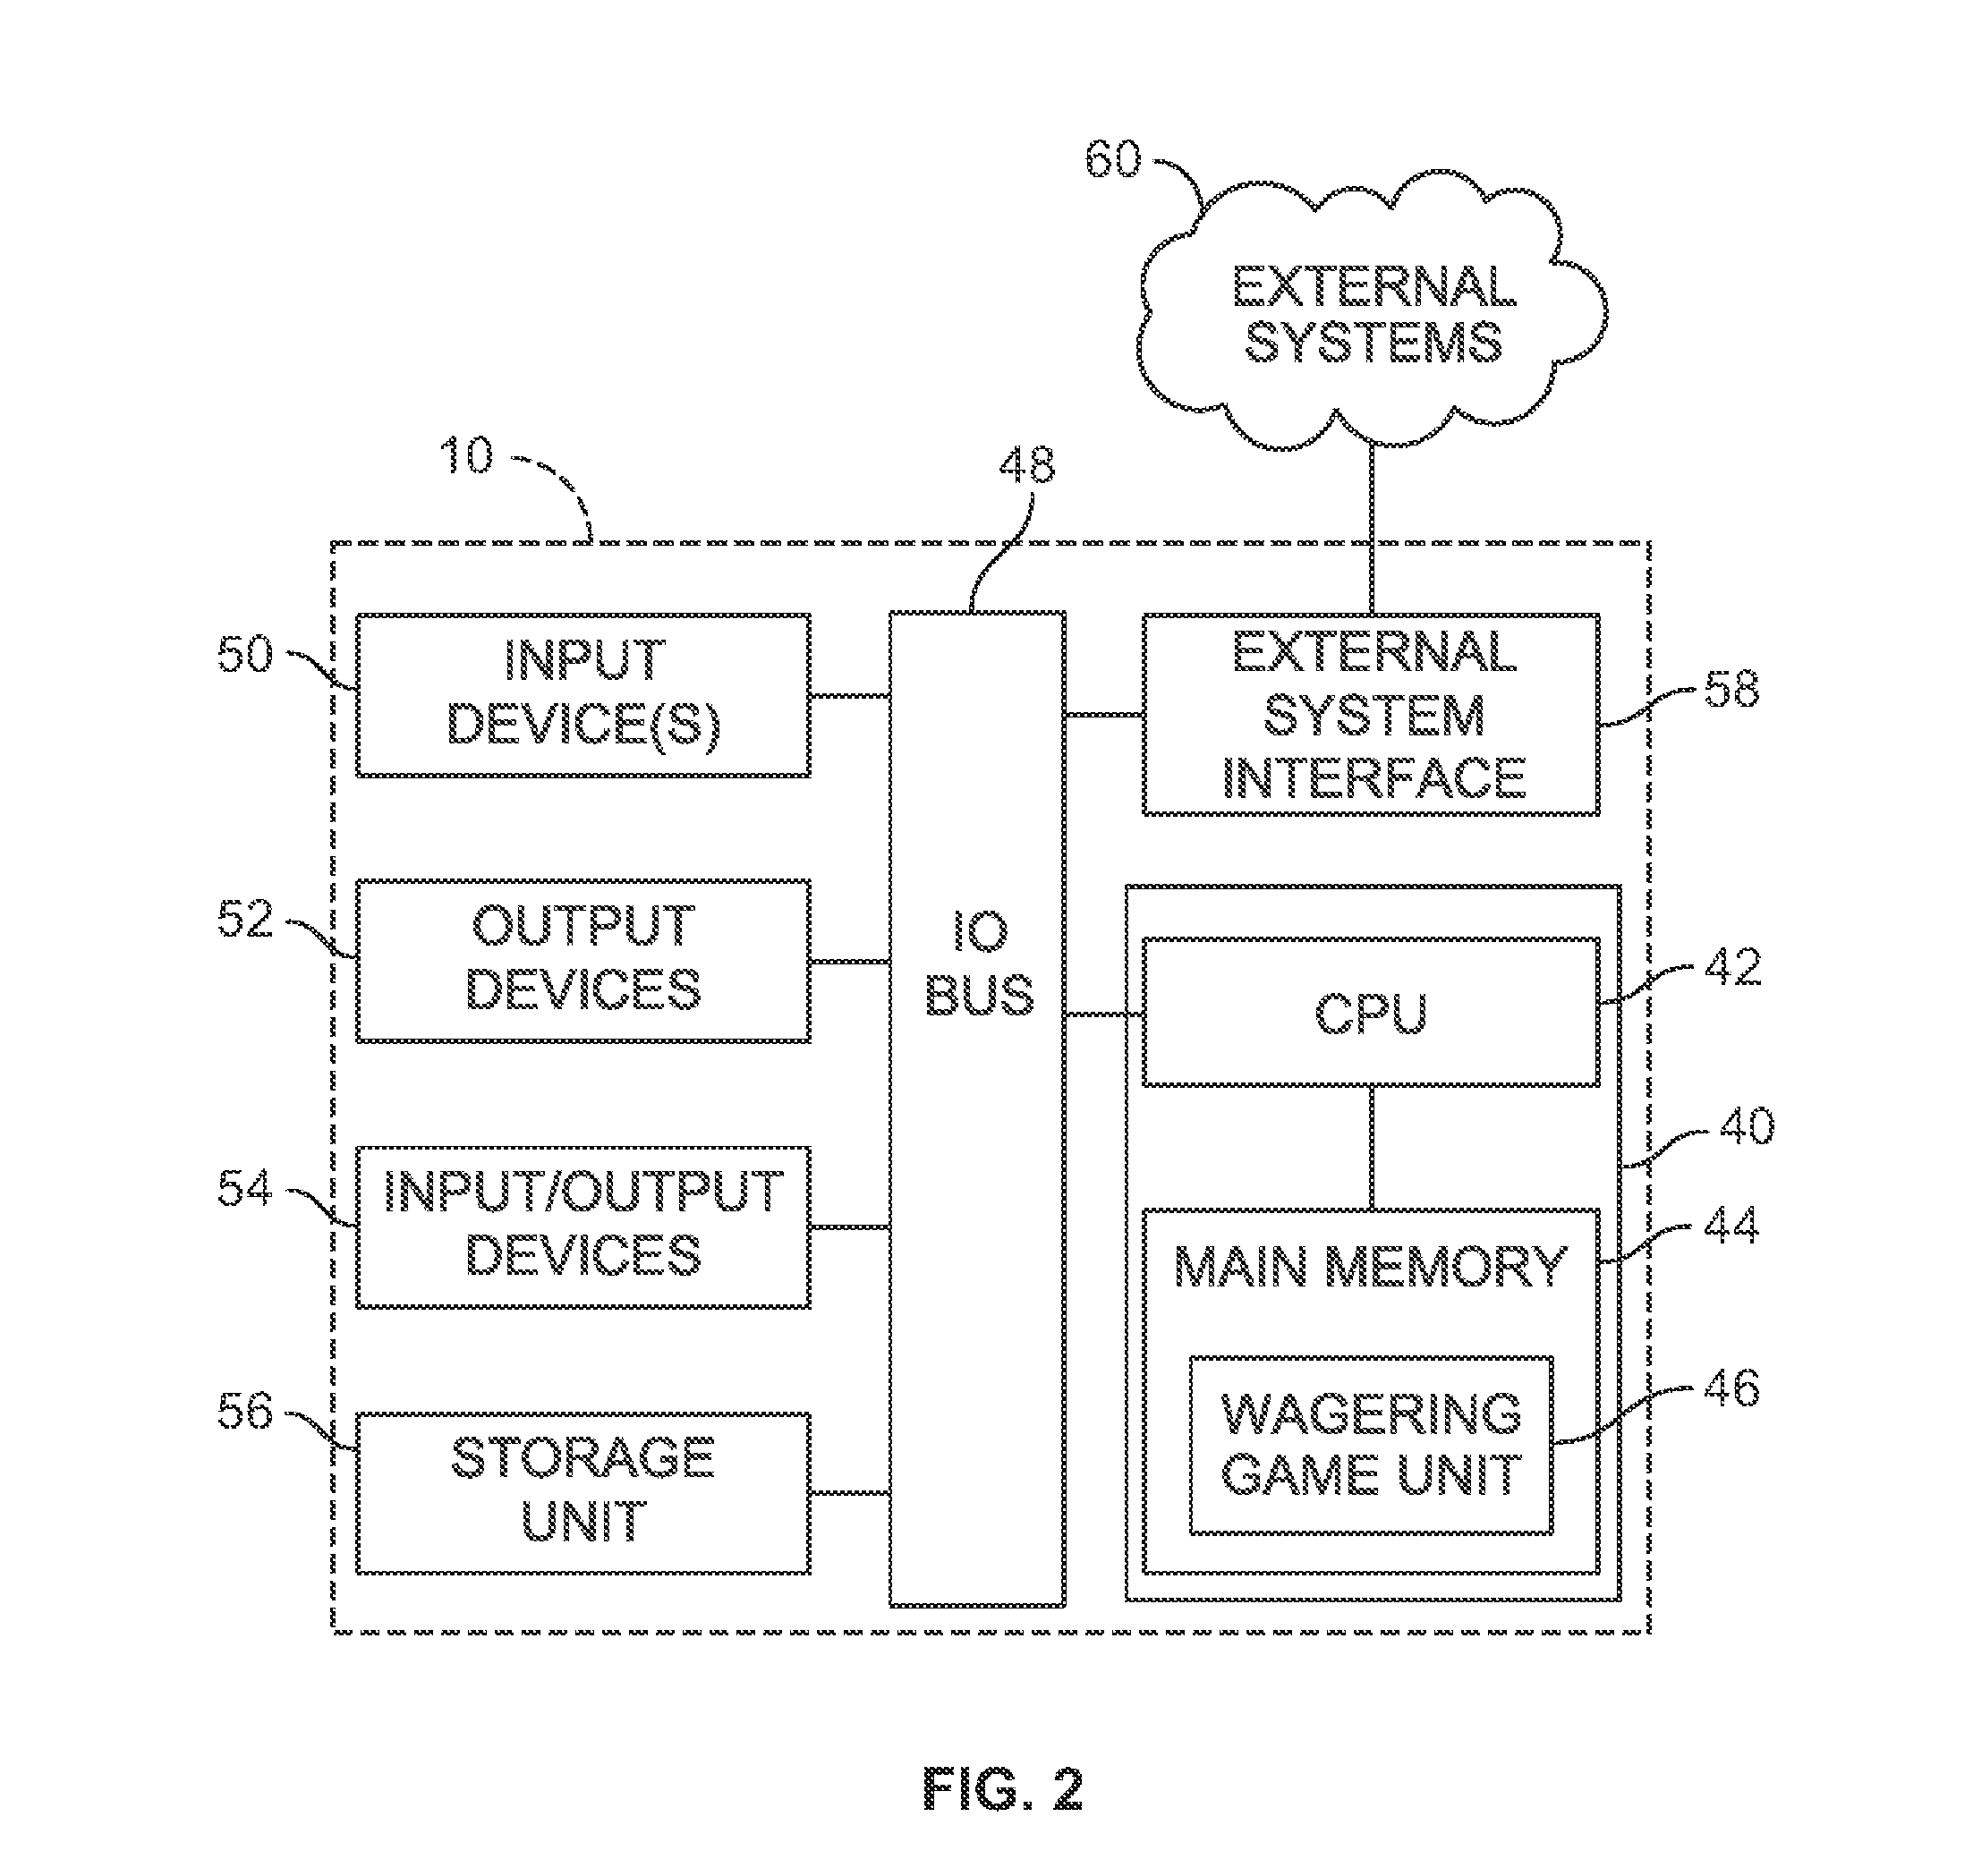 Gaming machine and system for concurrent gaming player interface manipulation based on visual focus